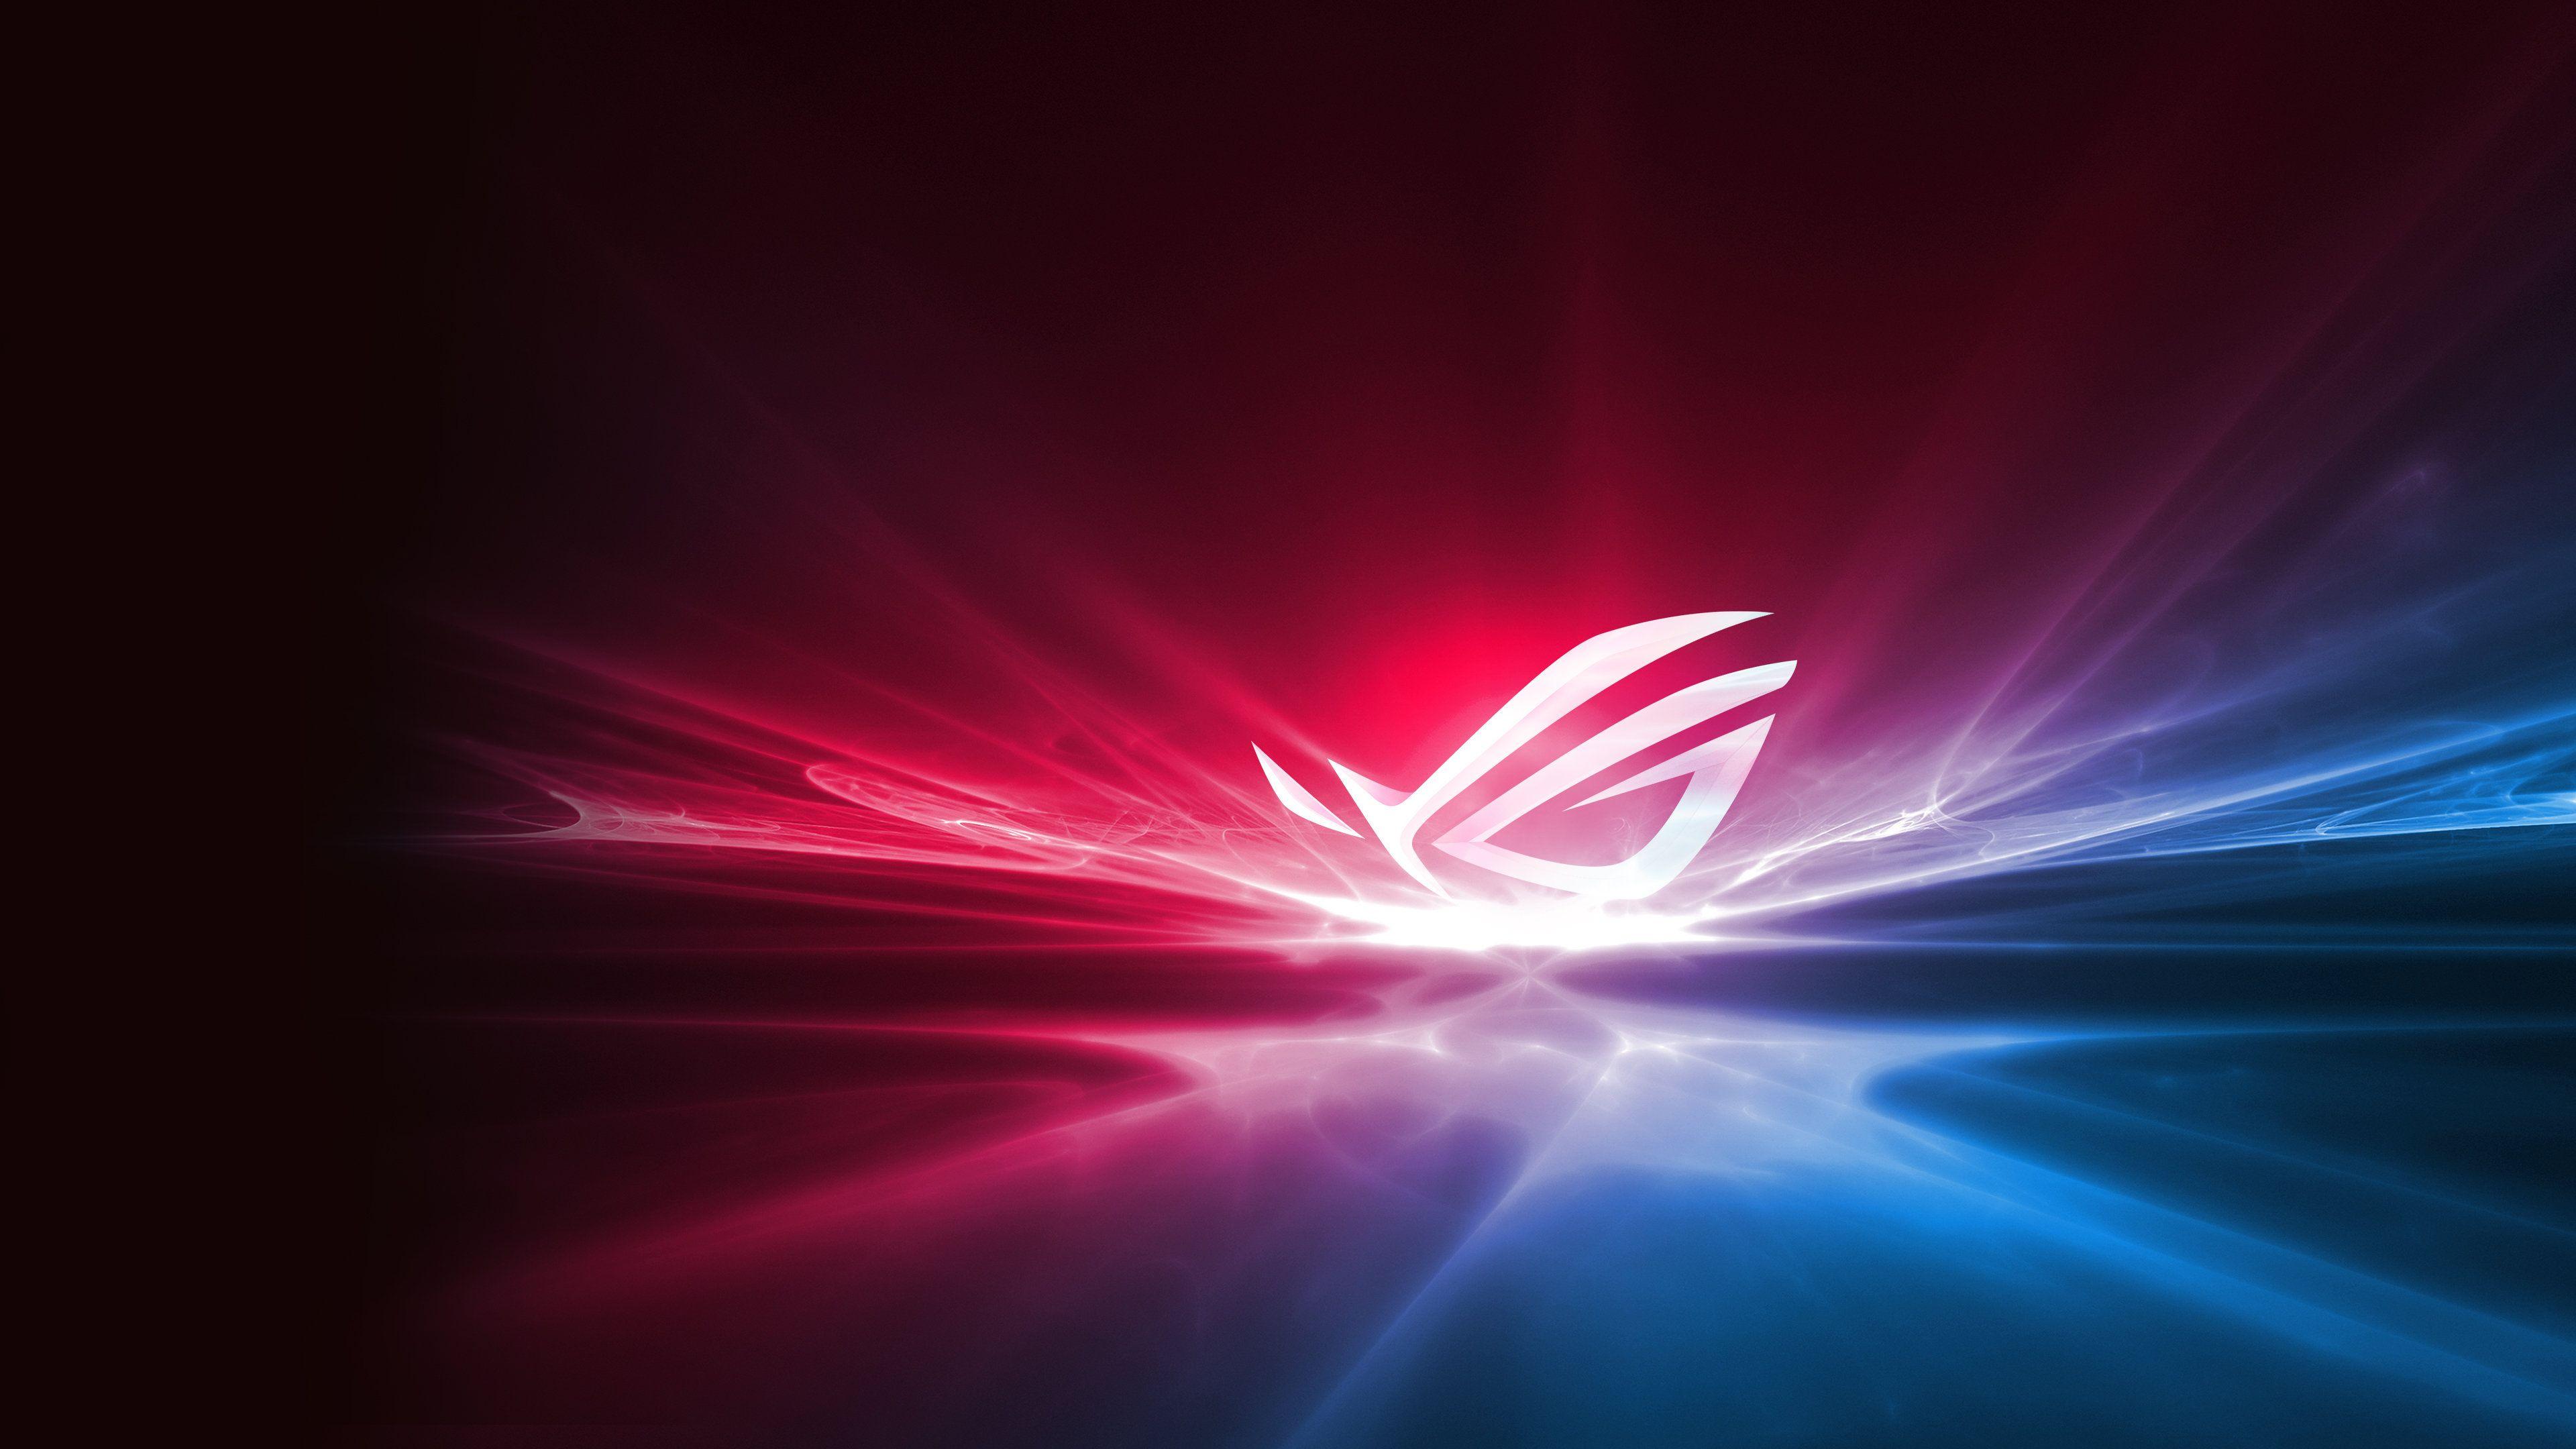 Win a ROG Zephyrus and PG27VQ Monitor: ROG Wallpapers Challenge